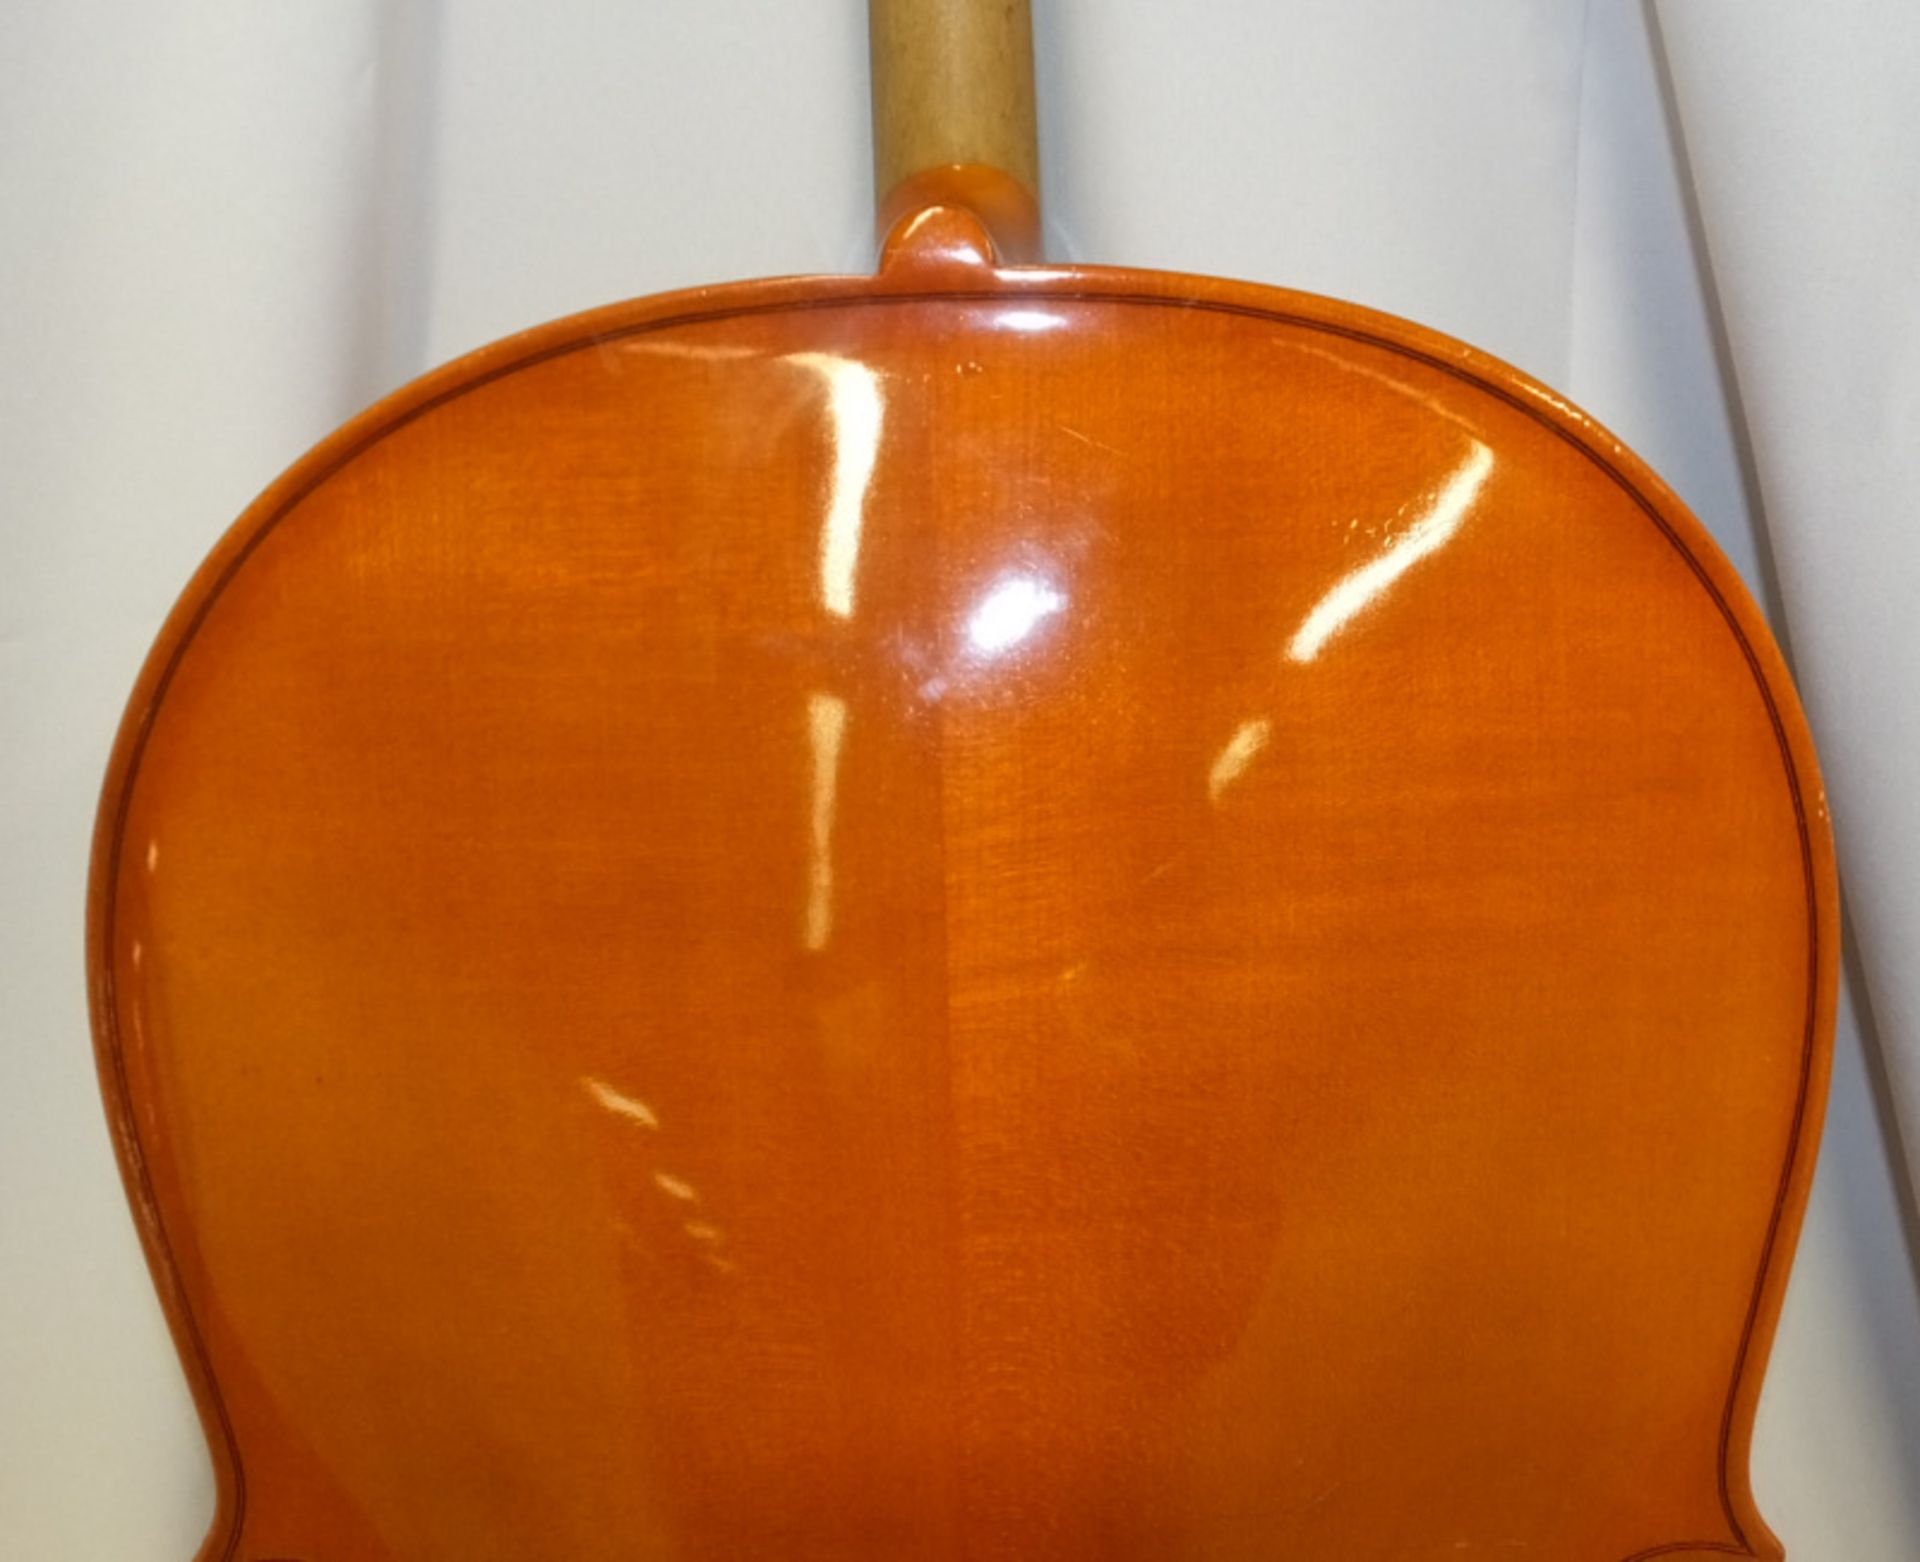 Cello in carry case (unbranded) - Please check photos carefully for damaged or missing components - Image 15 of 21